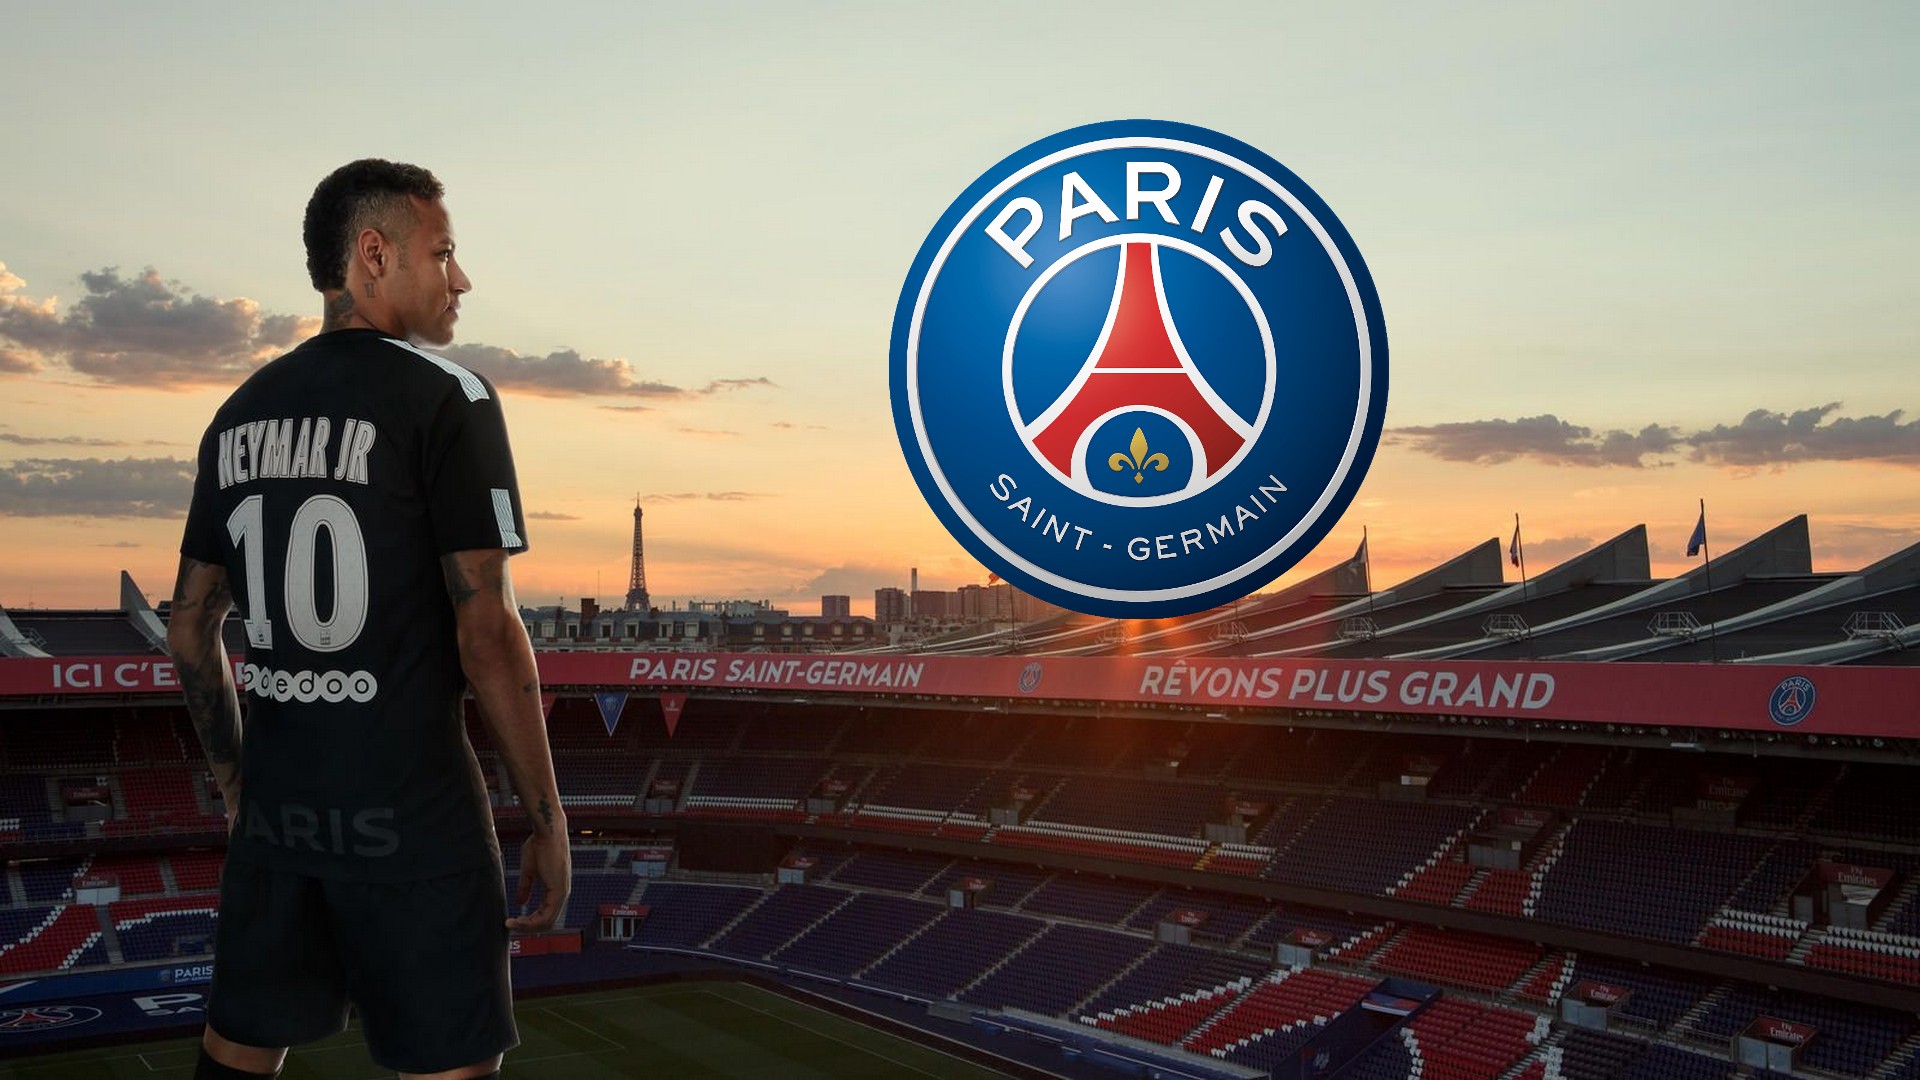 Neymar PSG Wallpaper HD With Resolution 1920X1080 pixel. You can make this wallpaper for your Mac or Windows Desktop Background, iPhone, Android or Tablet and another Smartphone device for free